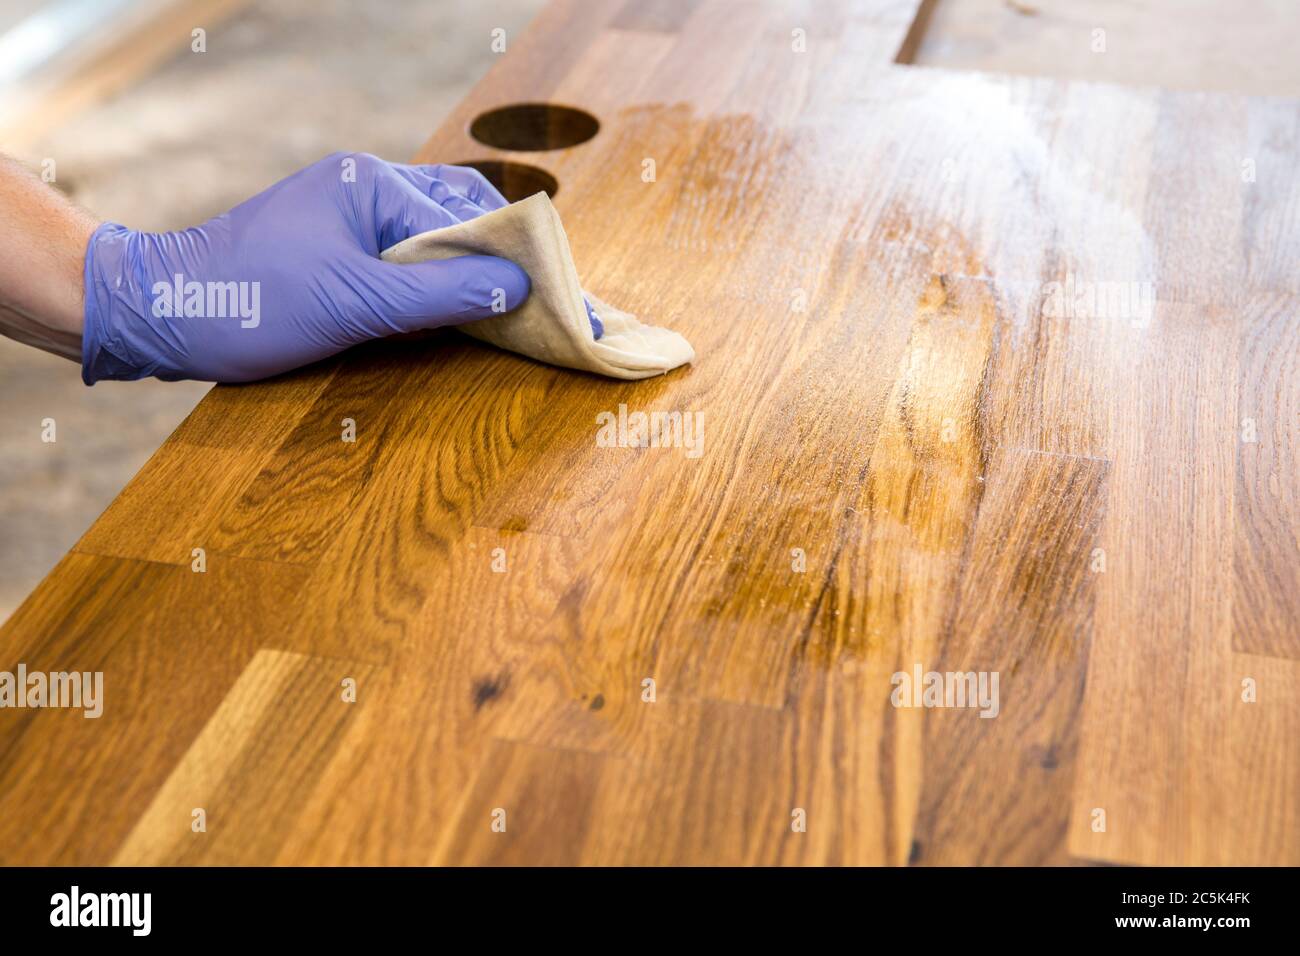 Person working, rubbing oiling with linseed oil natural wooden kitchen countertop before using. Solid wood butcherblock countertop maintenance concept Stock Photo